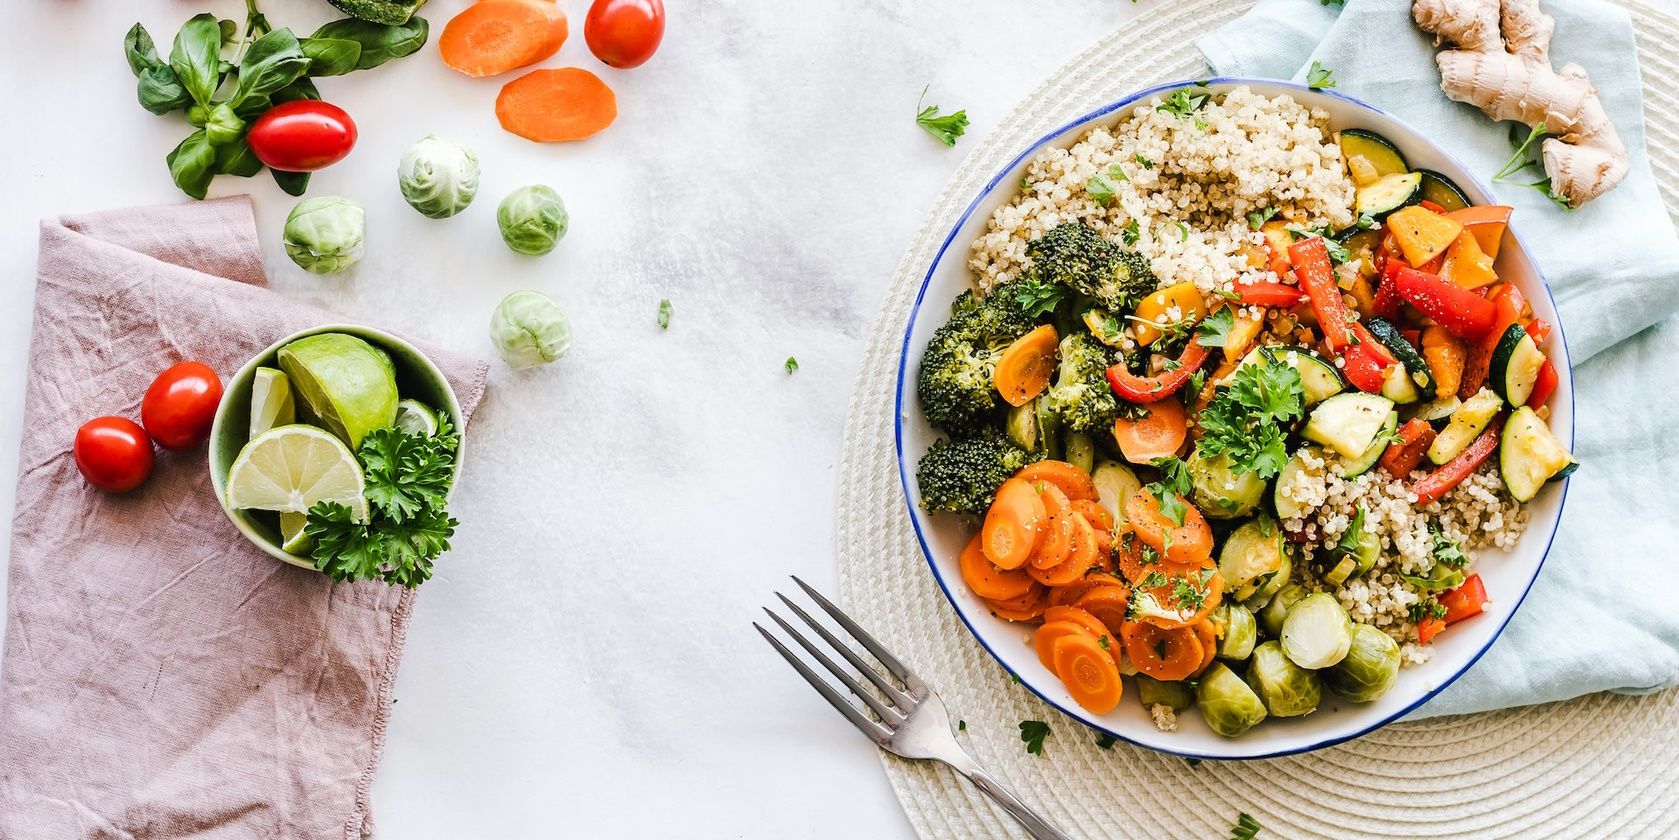 Vegetables and grains on healthy plate